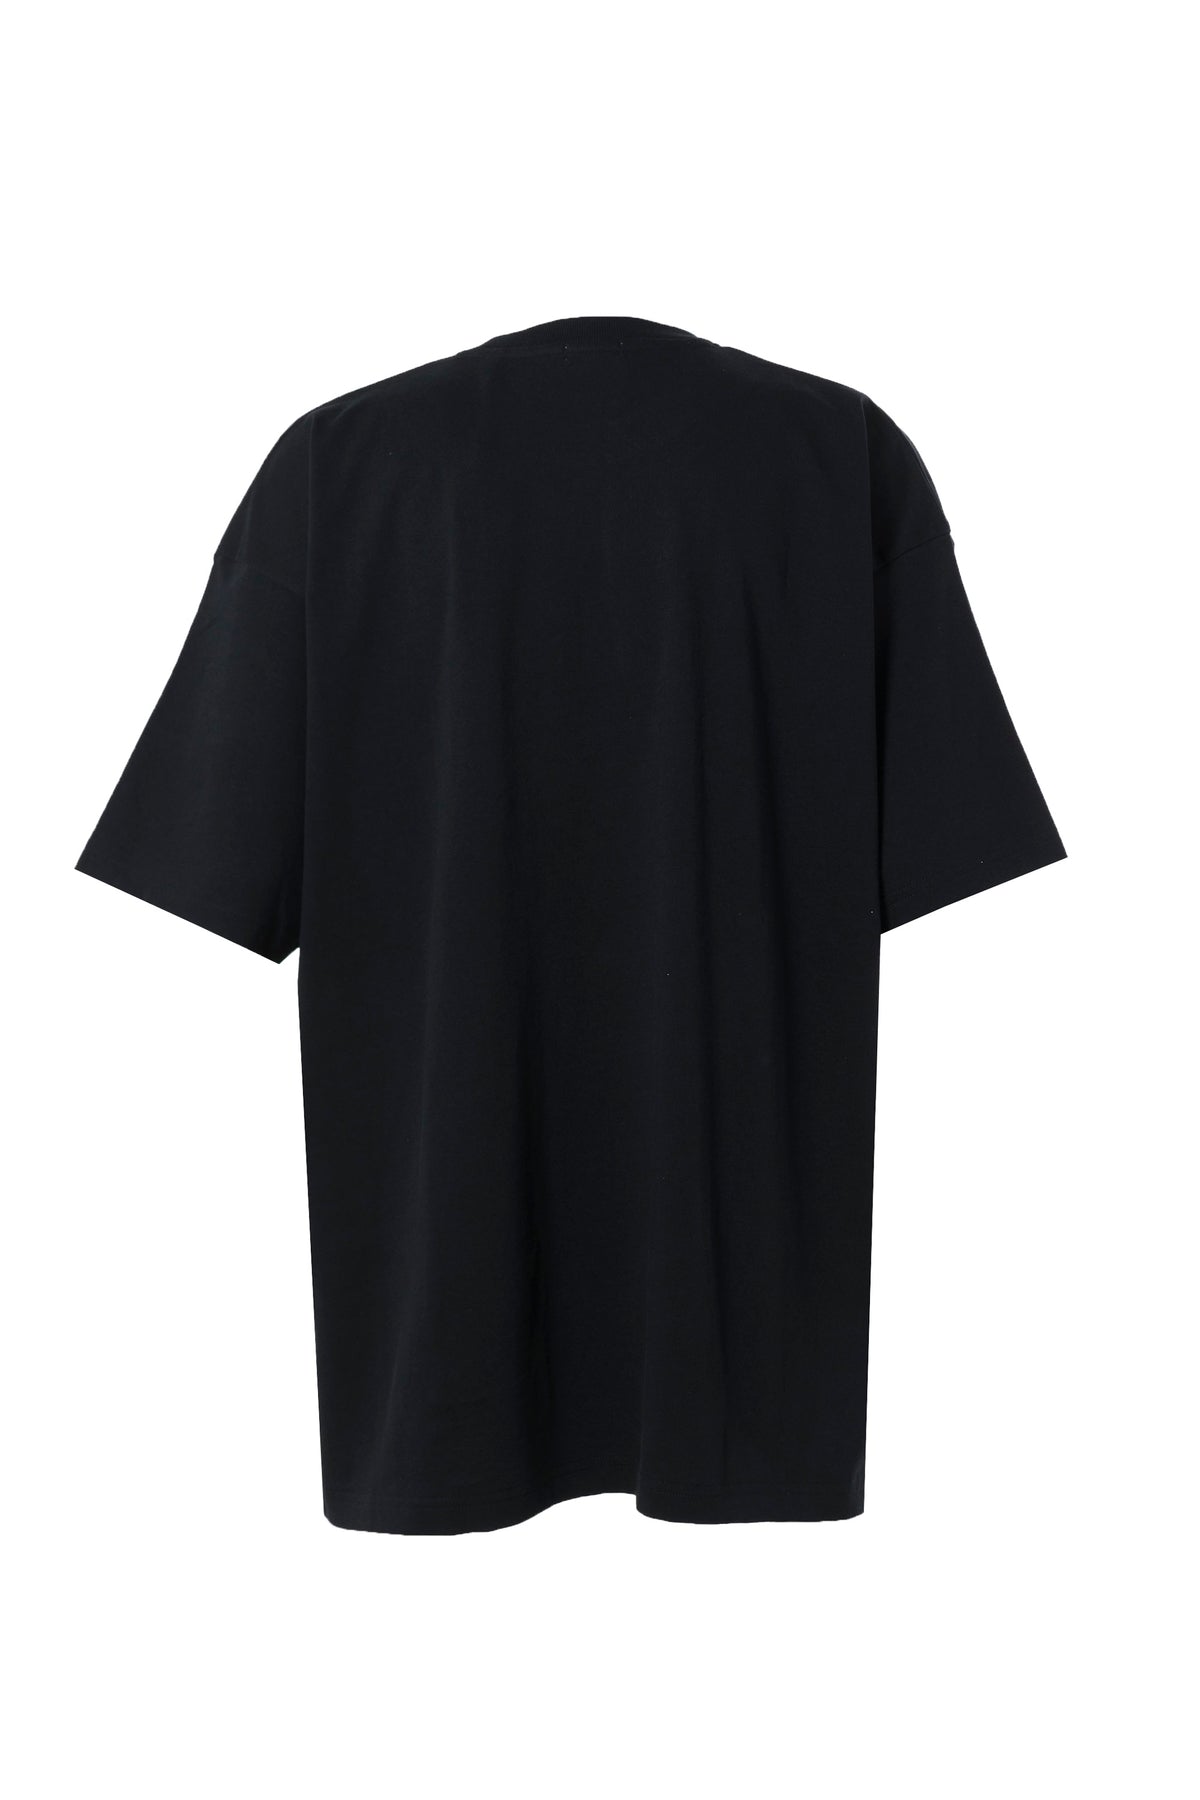 WILLY CHAVARRIA TOM TEE 1 / SOLID BLK